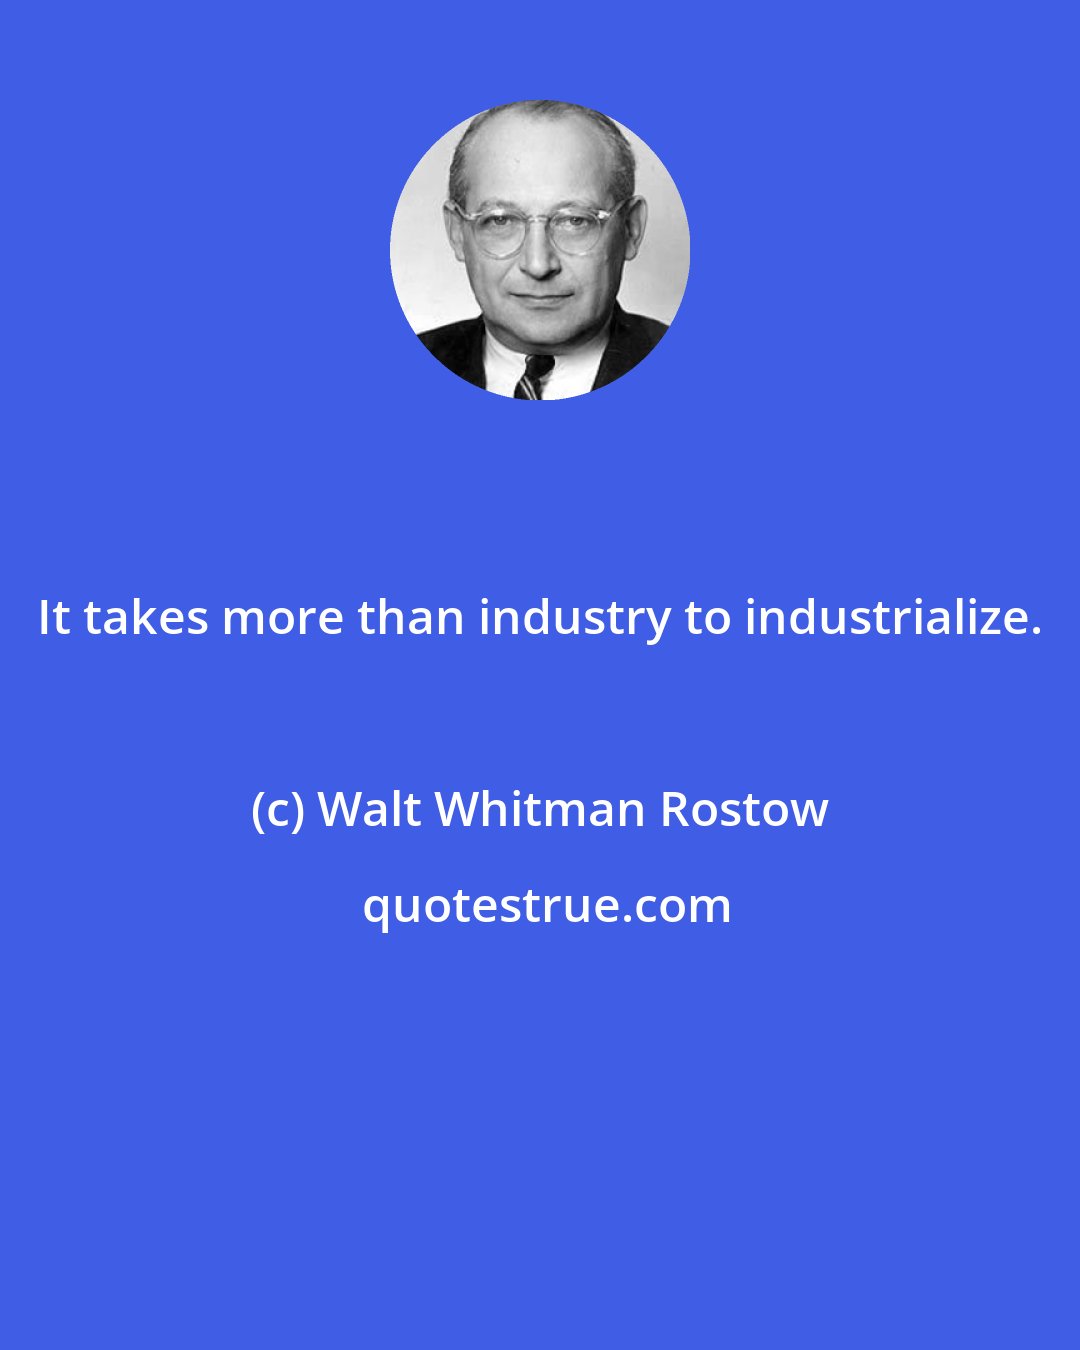 Walt Whitman Rostow: It takes more than industry to industrialize.